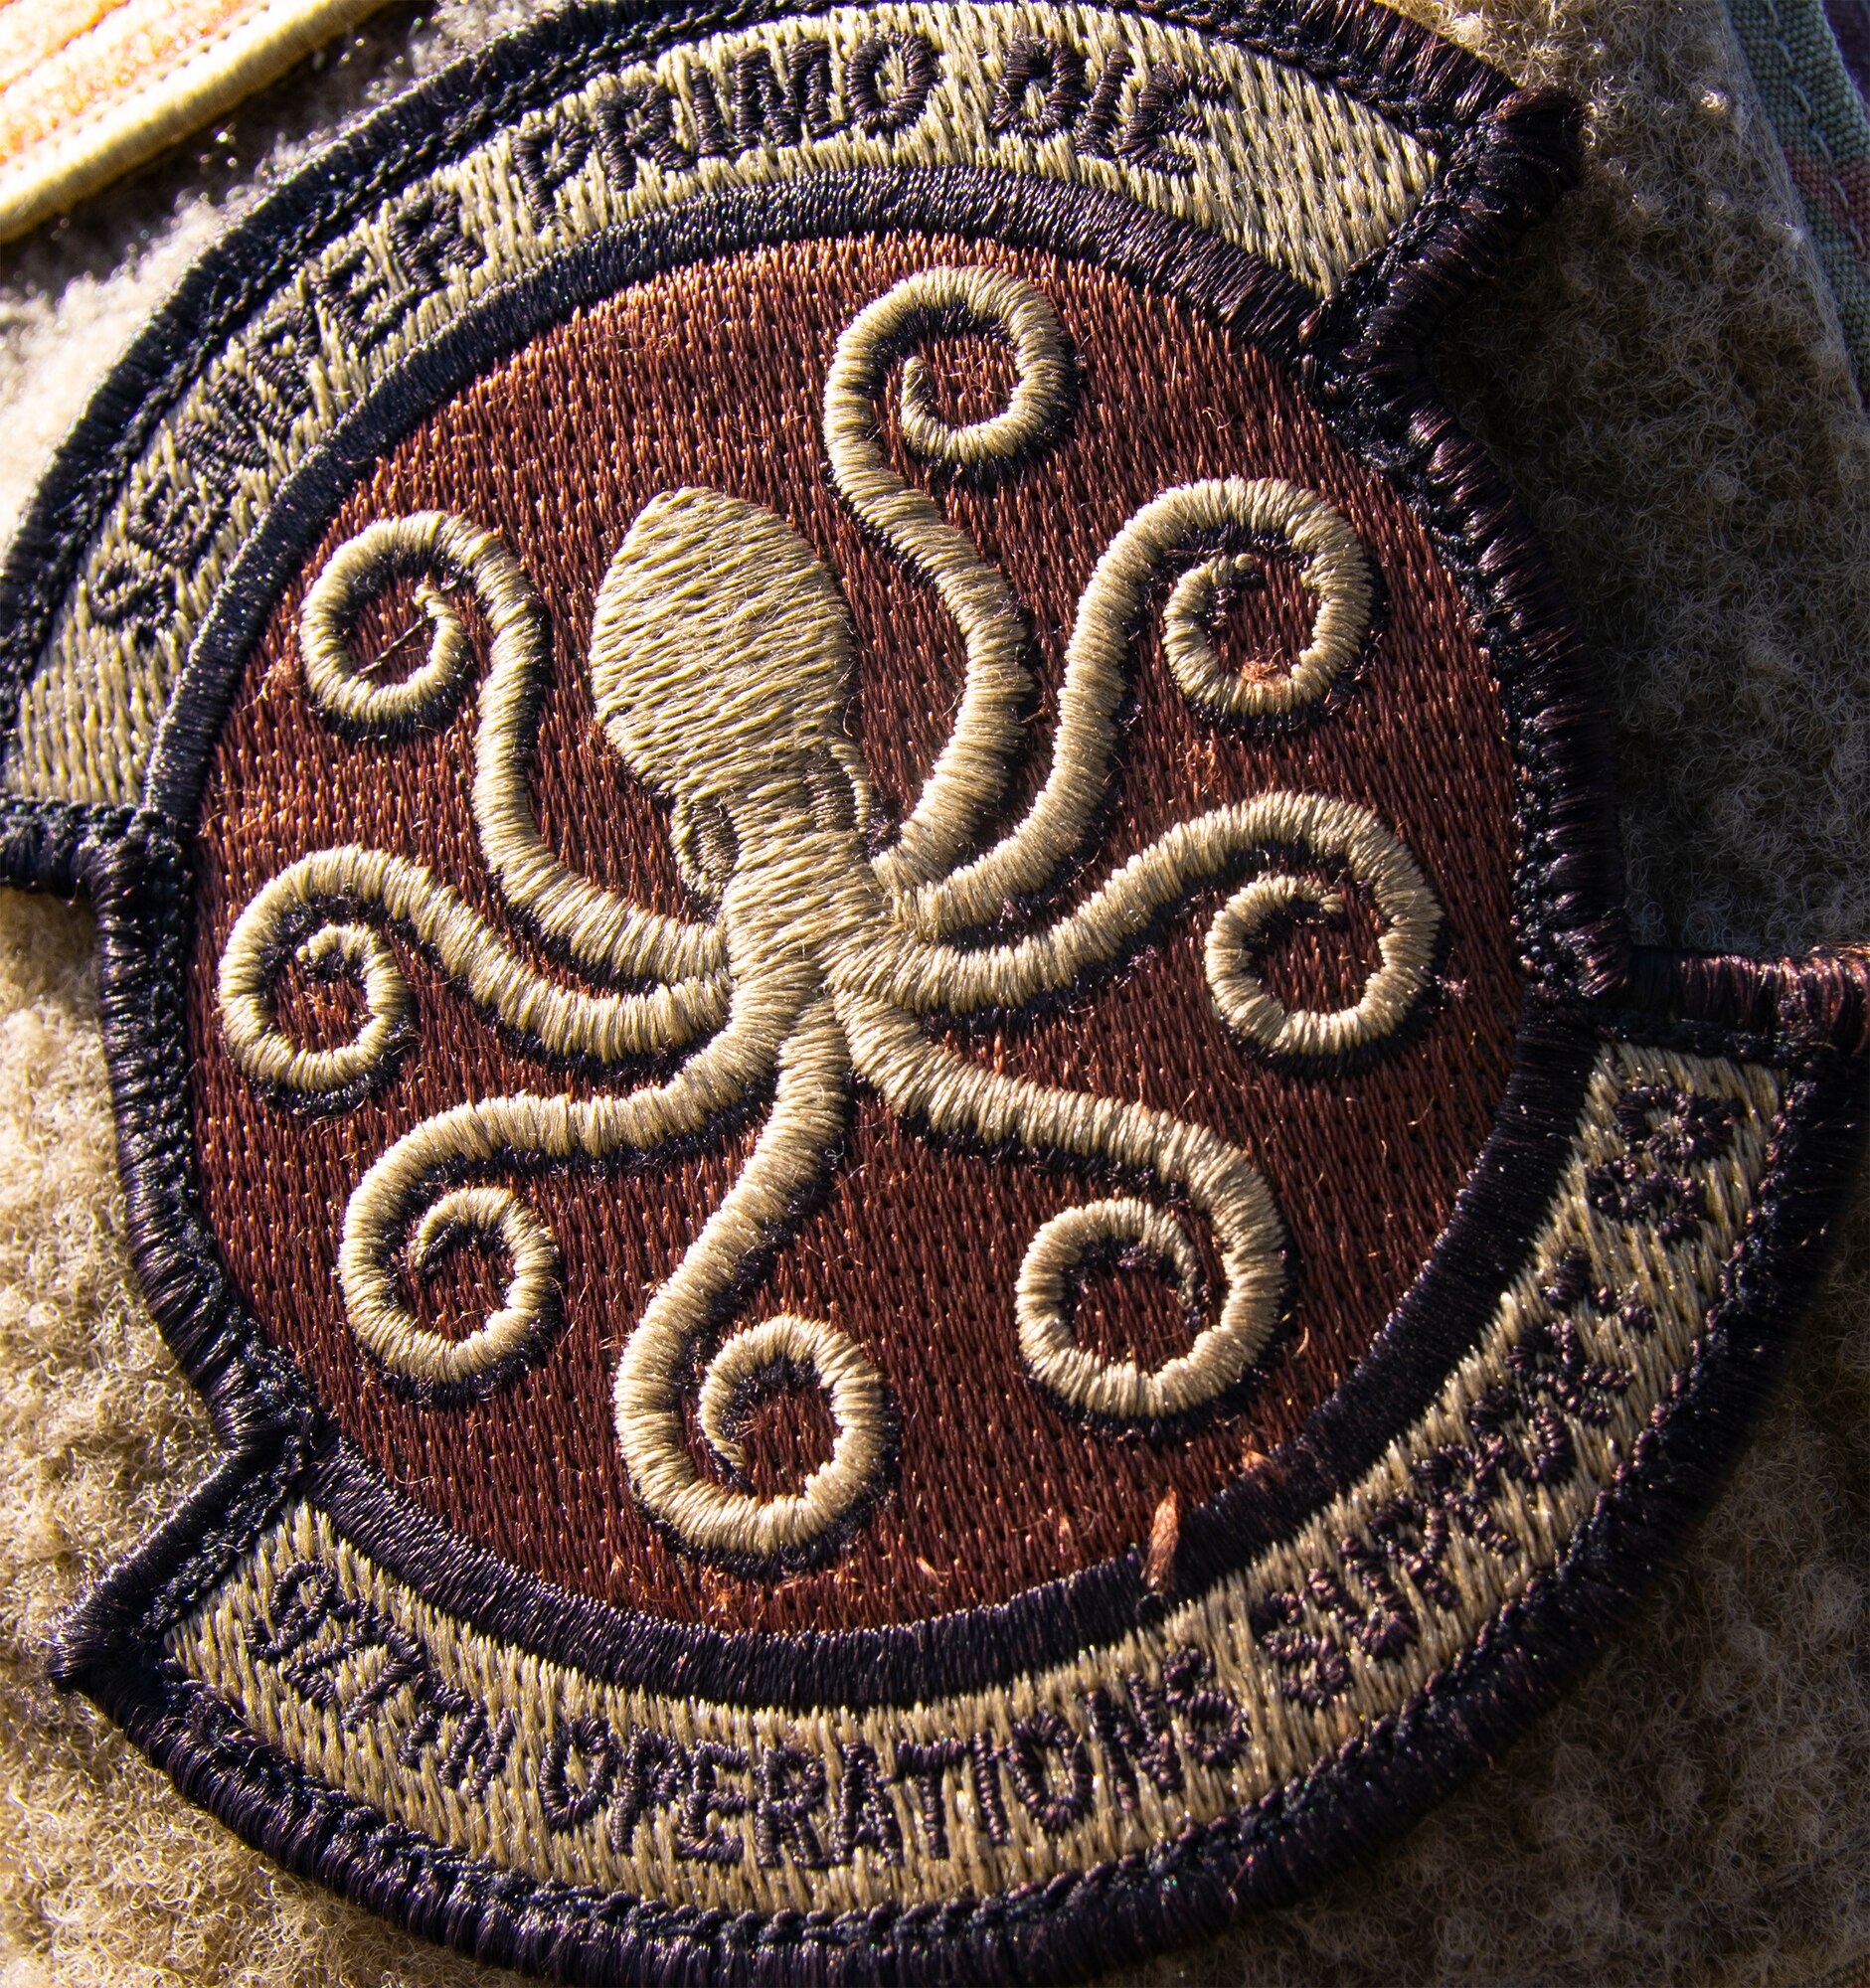 The newly approved emblem of the 927th Operations Support Squadron is pictured in the configuration and color scheme for the Air Force Occupational Camouflage Pattern uniform. Illustrated within the patch is an eight-armed sea monster known as the kraken, as well as the Squadron’s motto “Semper Primo Die,” which is Latin for “Always the first day.” (U.S. Air Force photo by Tech Sgt. Bradley Tipton)